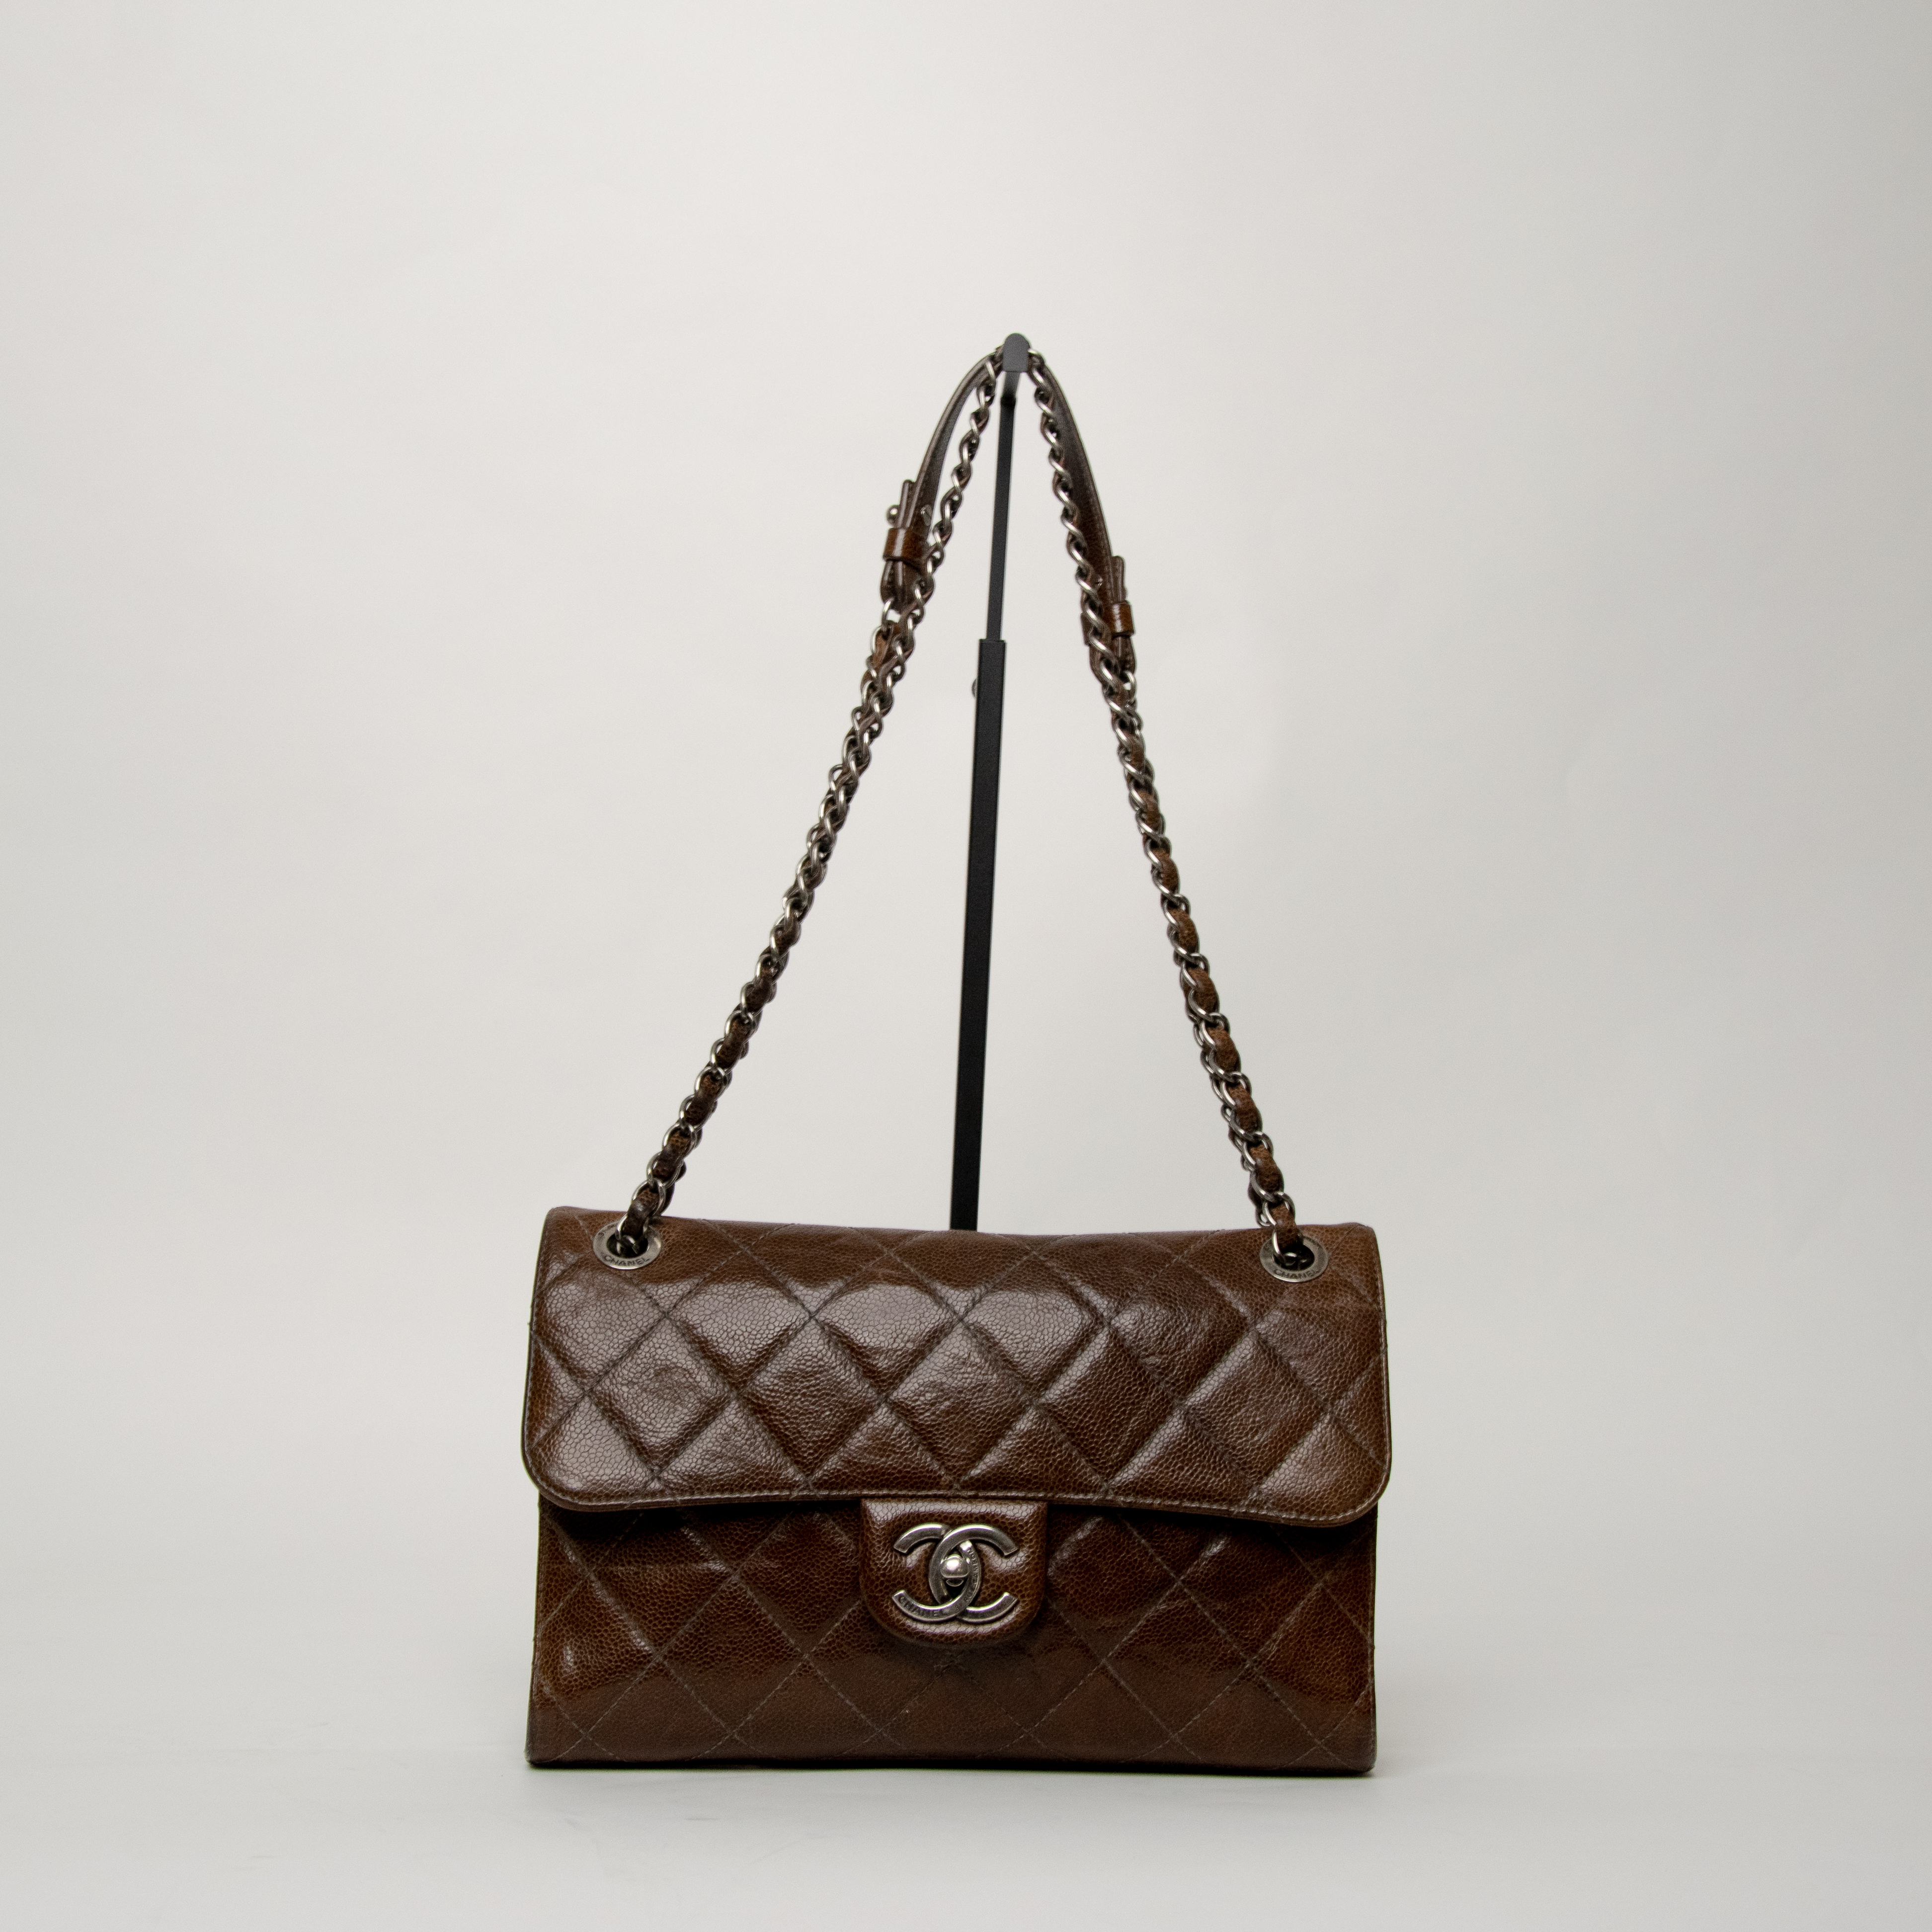 Chanel Single Flap Bag Caviar Brown with aged silver hardware